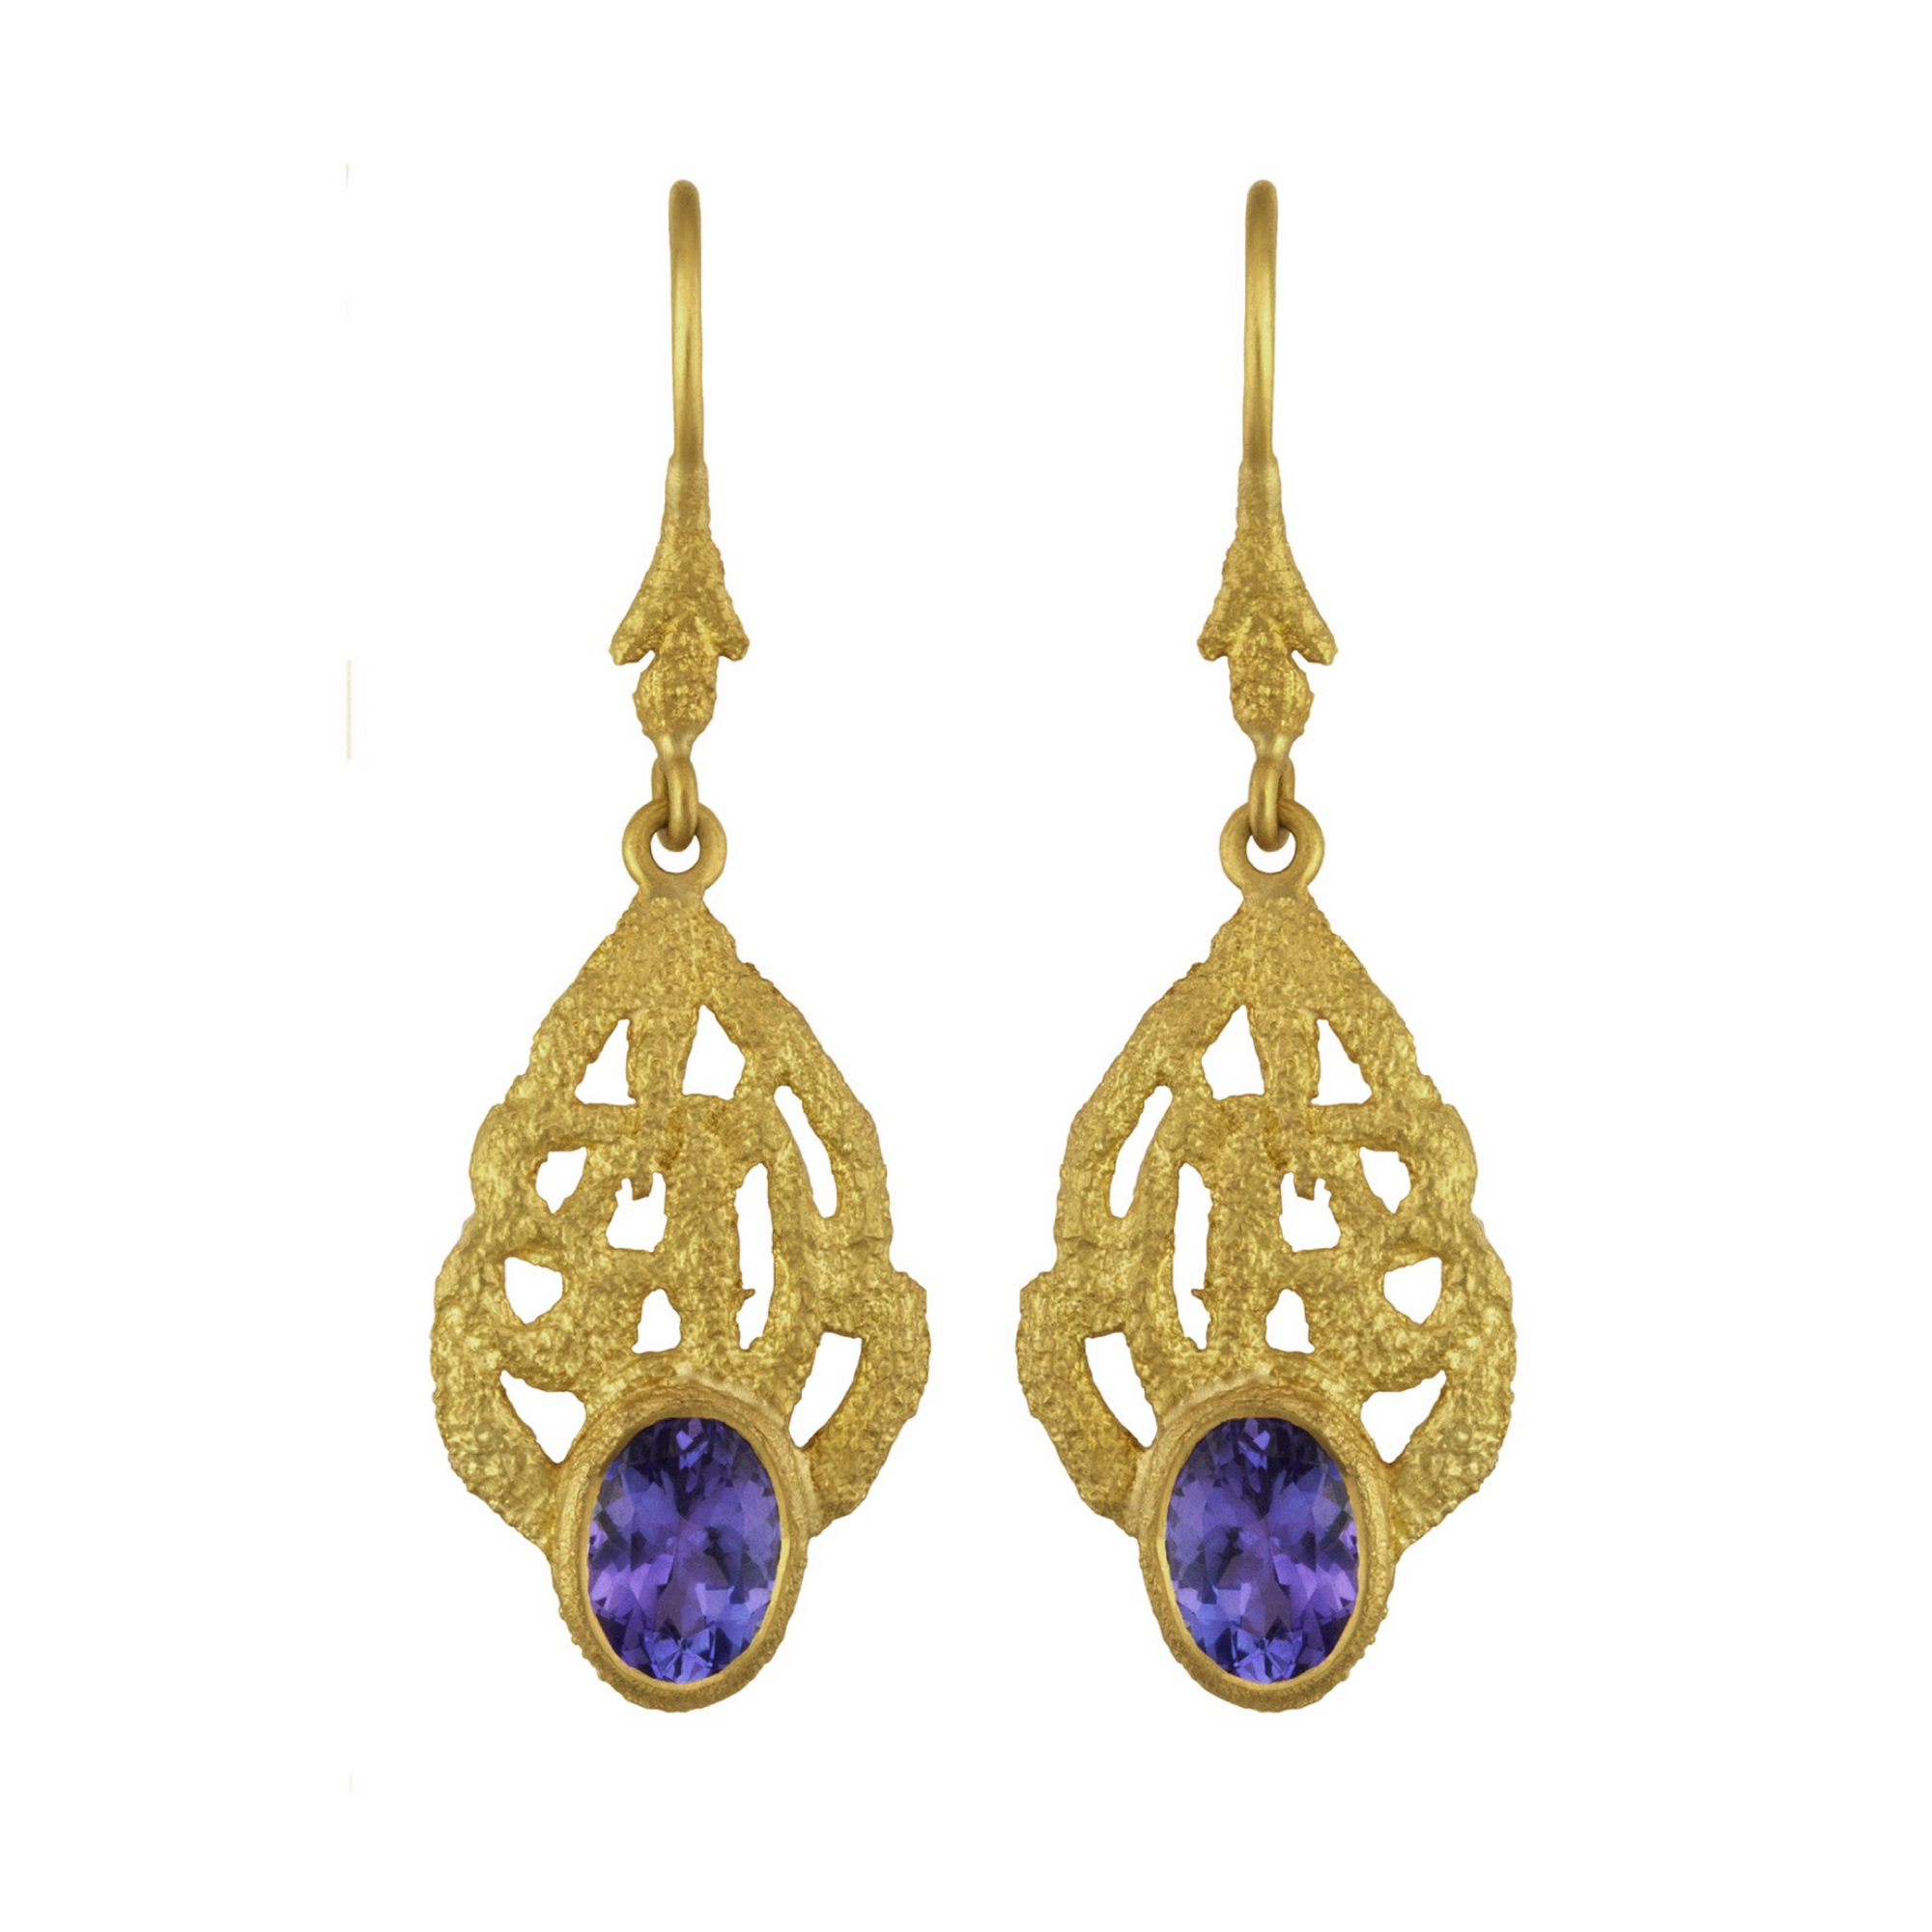 Tanzanite Honeycomb Earrings by Laurie Kaiser available at Talisman Collection Fine Jewelers in El Dorado Hills, CA and online. Crafted in textured 18k yellow gold, the Tanzanite Honeycomb Earrings feature an intricate design inspired by nature's honeycomb structure. These simple drop earrings delicately sway on an elegant ear wire and will make sweet addition to your jewelry wardrobe.